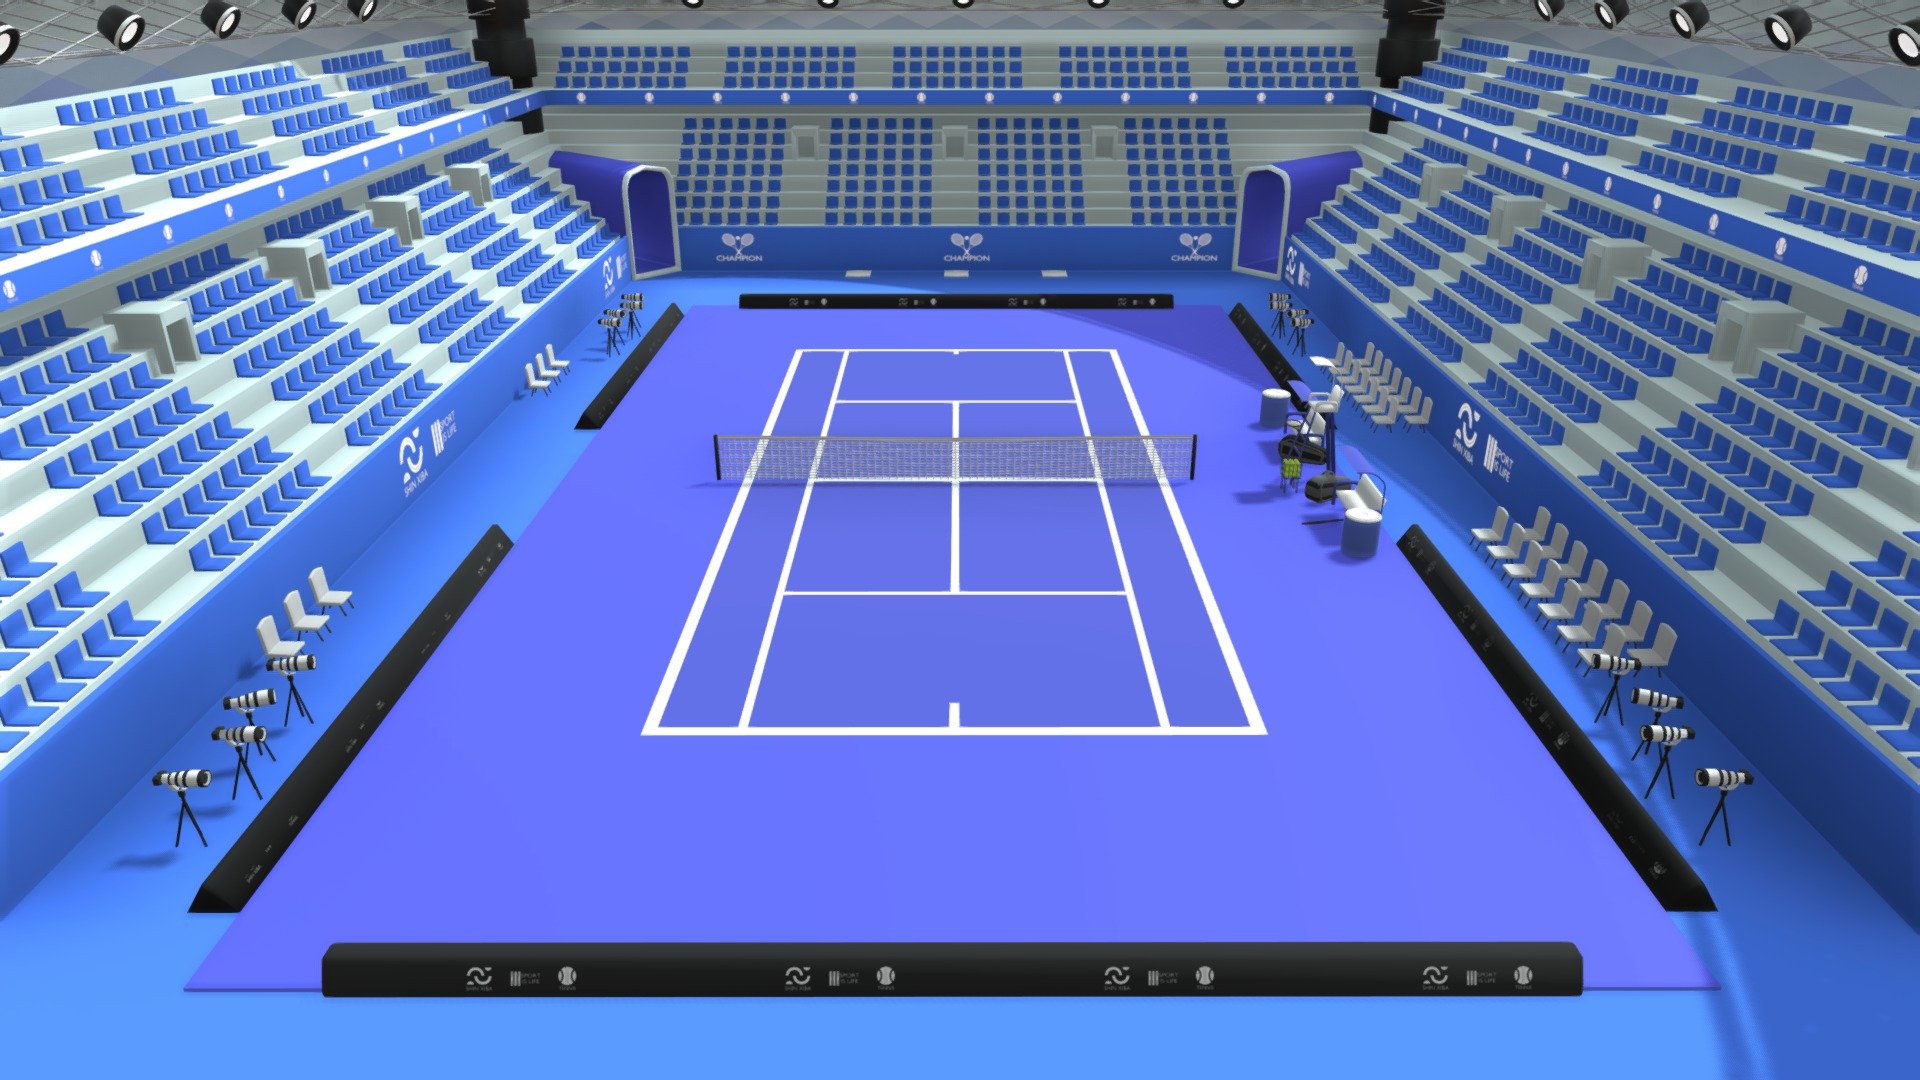 Play Tennis Arena Online for Free on PC & Mobile